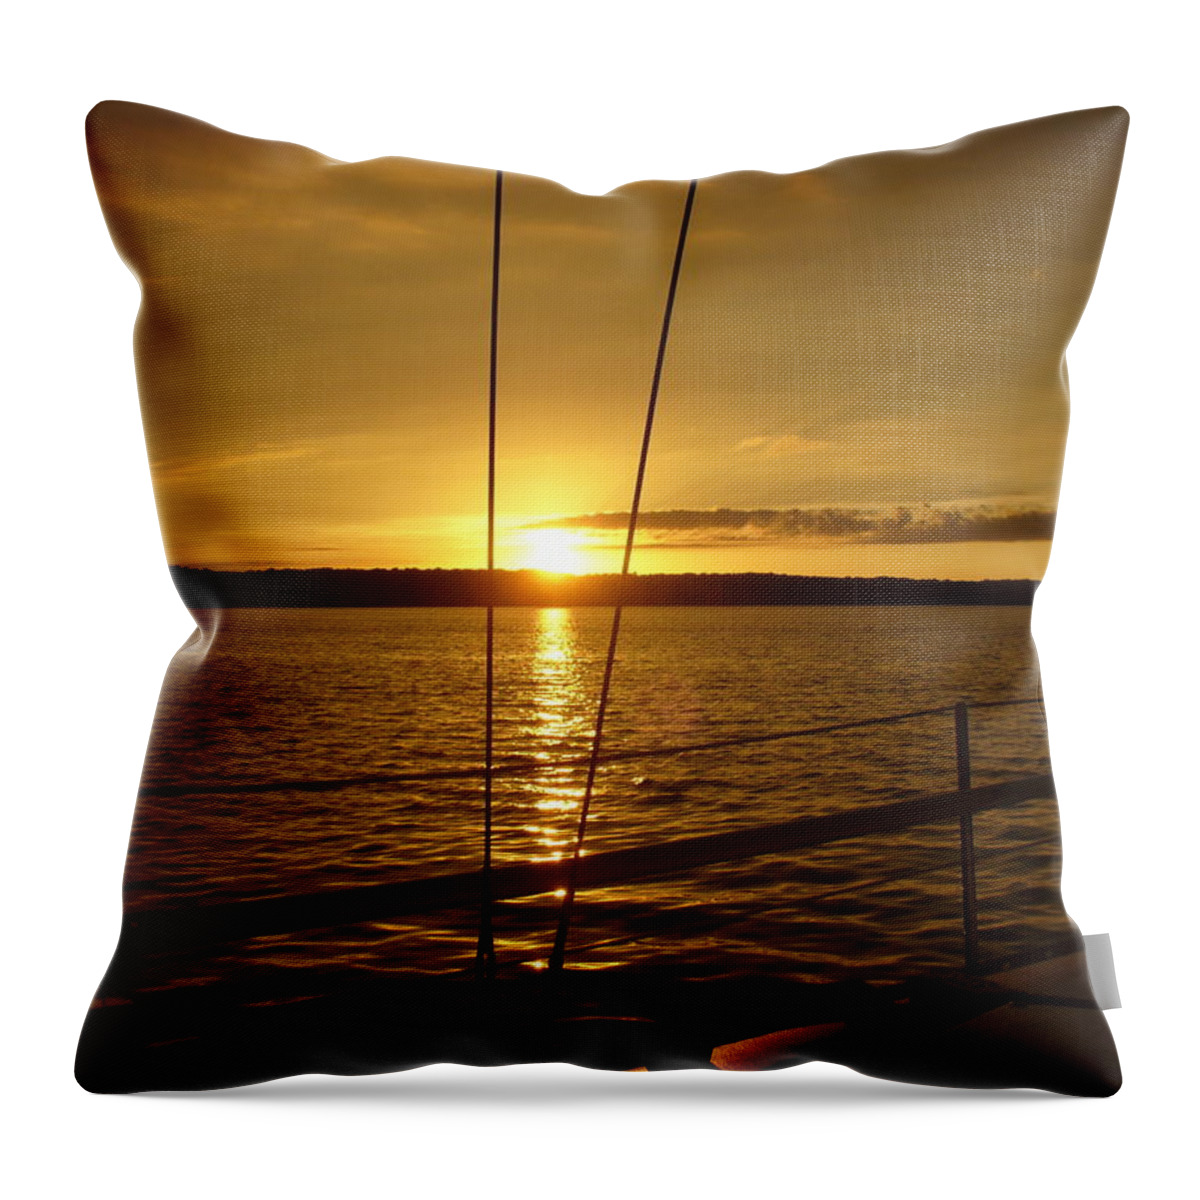 Sunset Throw Pillow featuring the photograph Stay Golden by Deena Stoddard